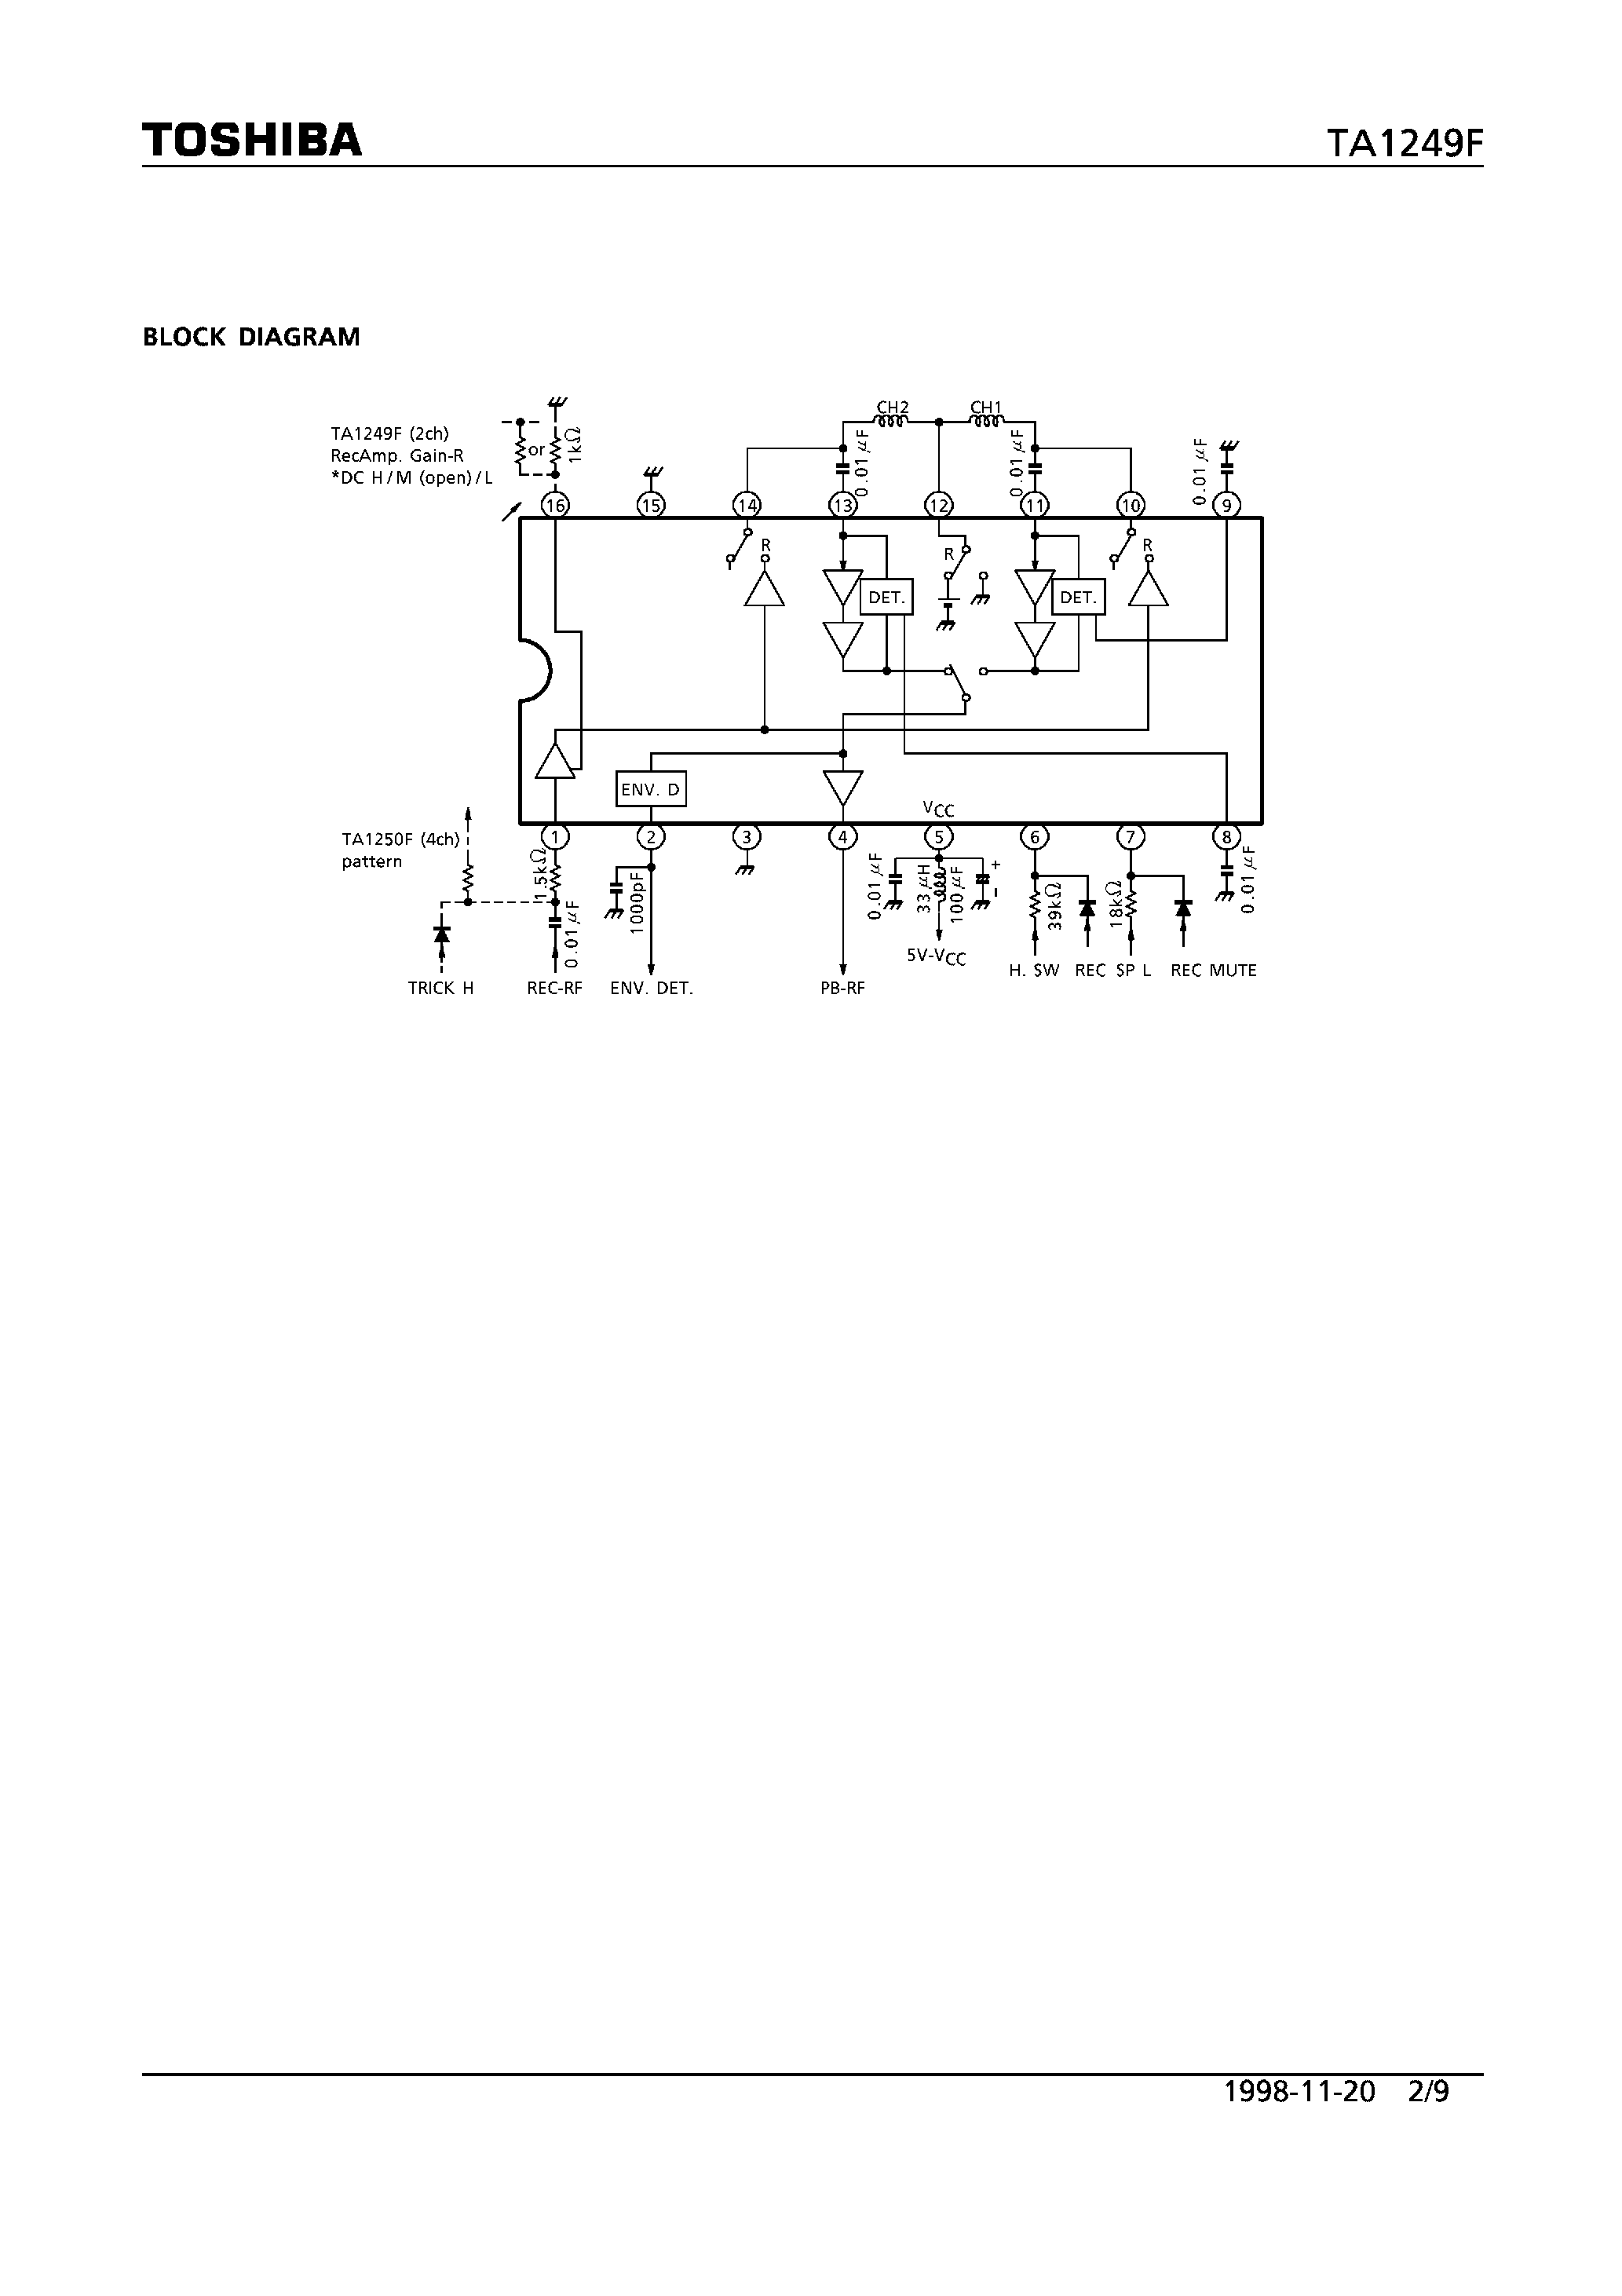 Datasheet TA1249F - 2-CHANNEL RECORDING AMPLIFIER & PRE-AMPLIFIER FOR VCR page 2